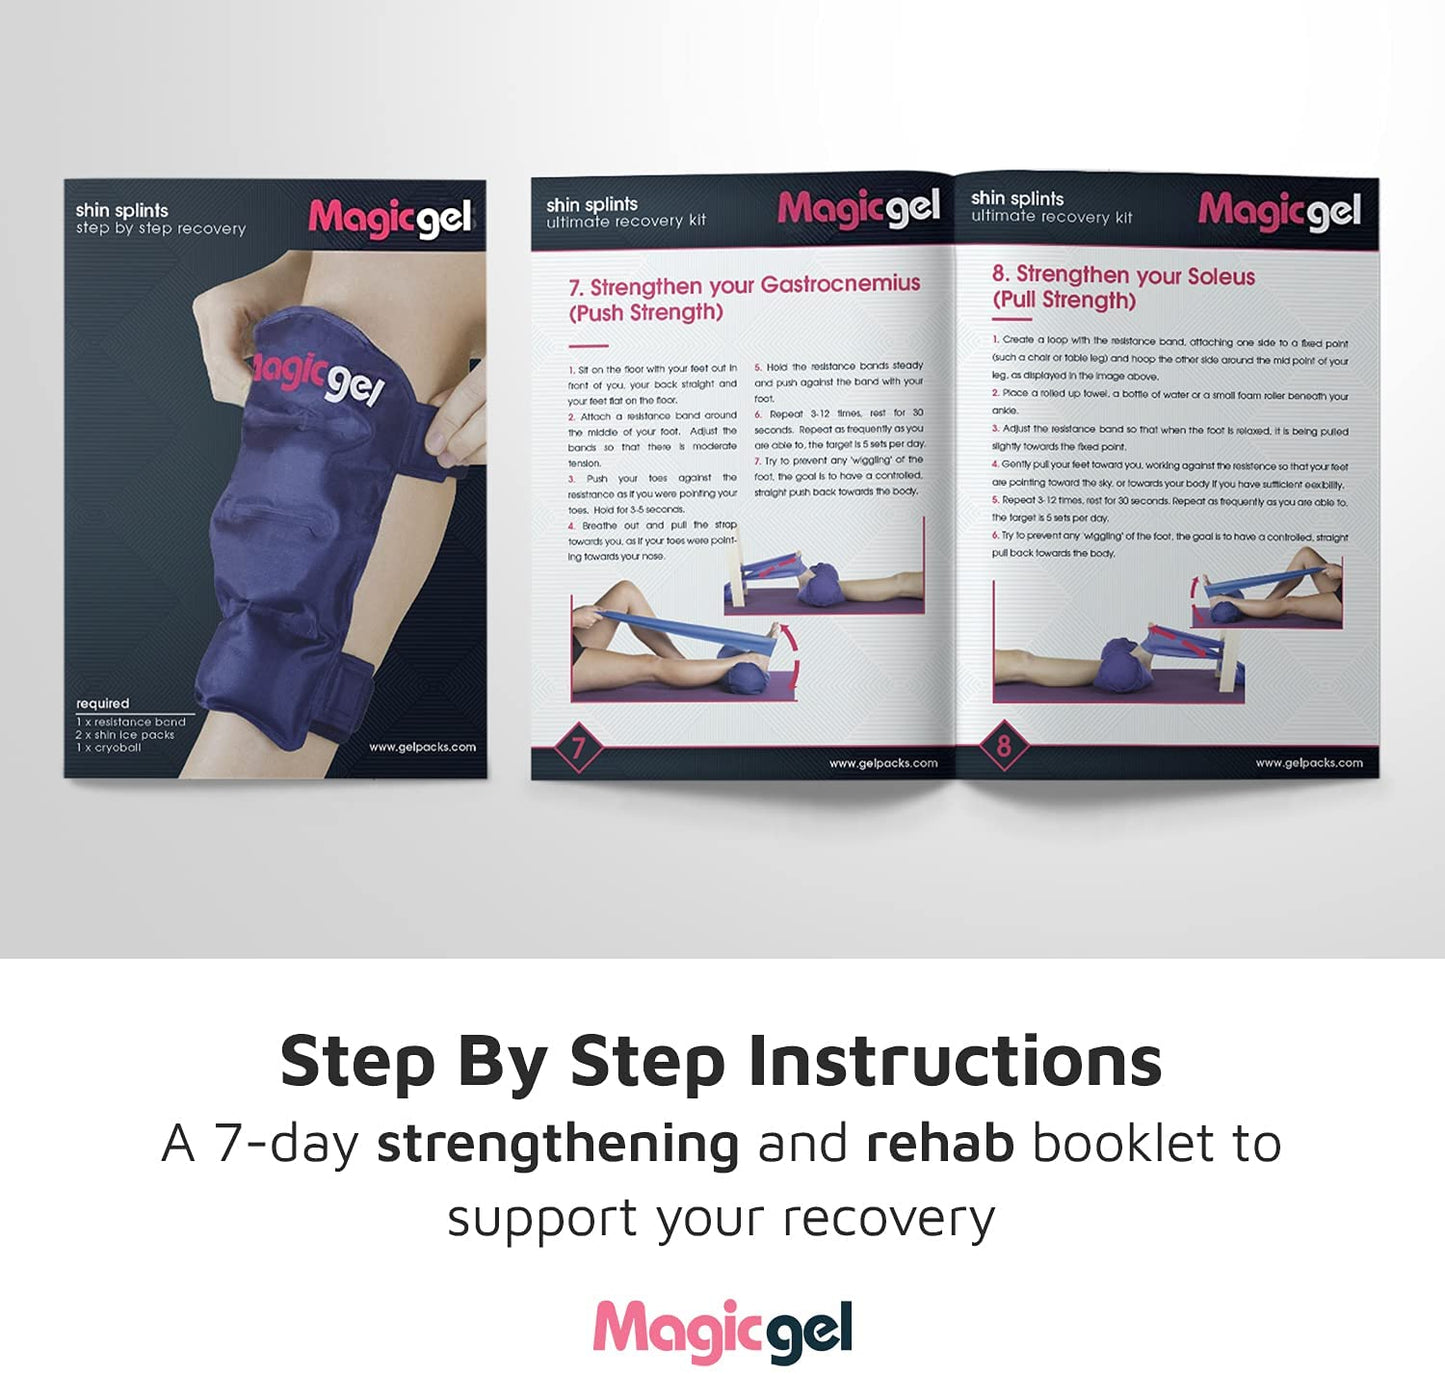 Shin Ice Pack - A Complete Recovery Kit for Shin Splints (With Roller and Stretch Band)